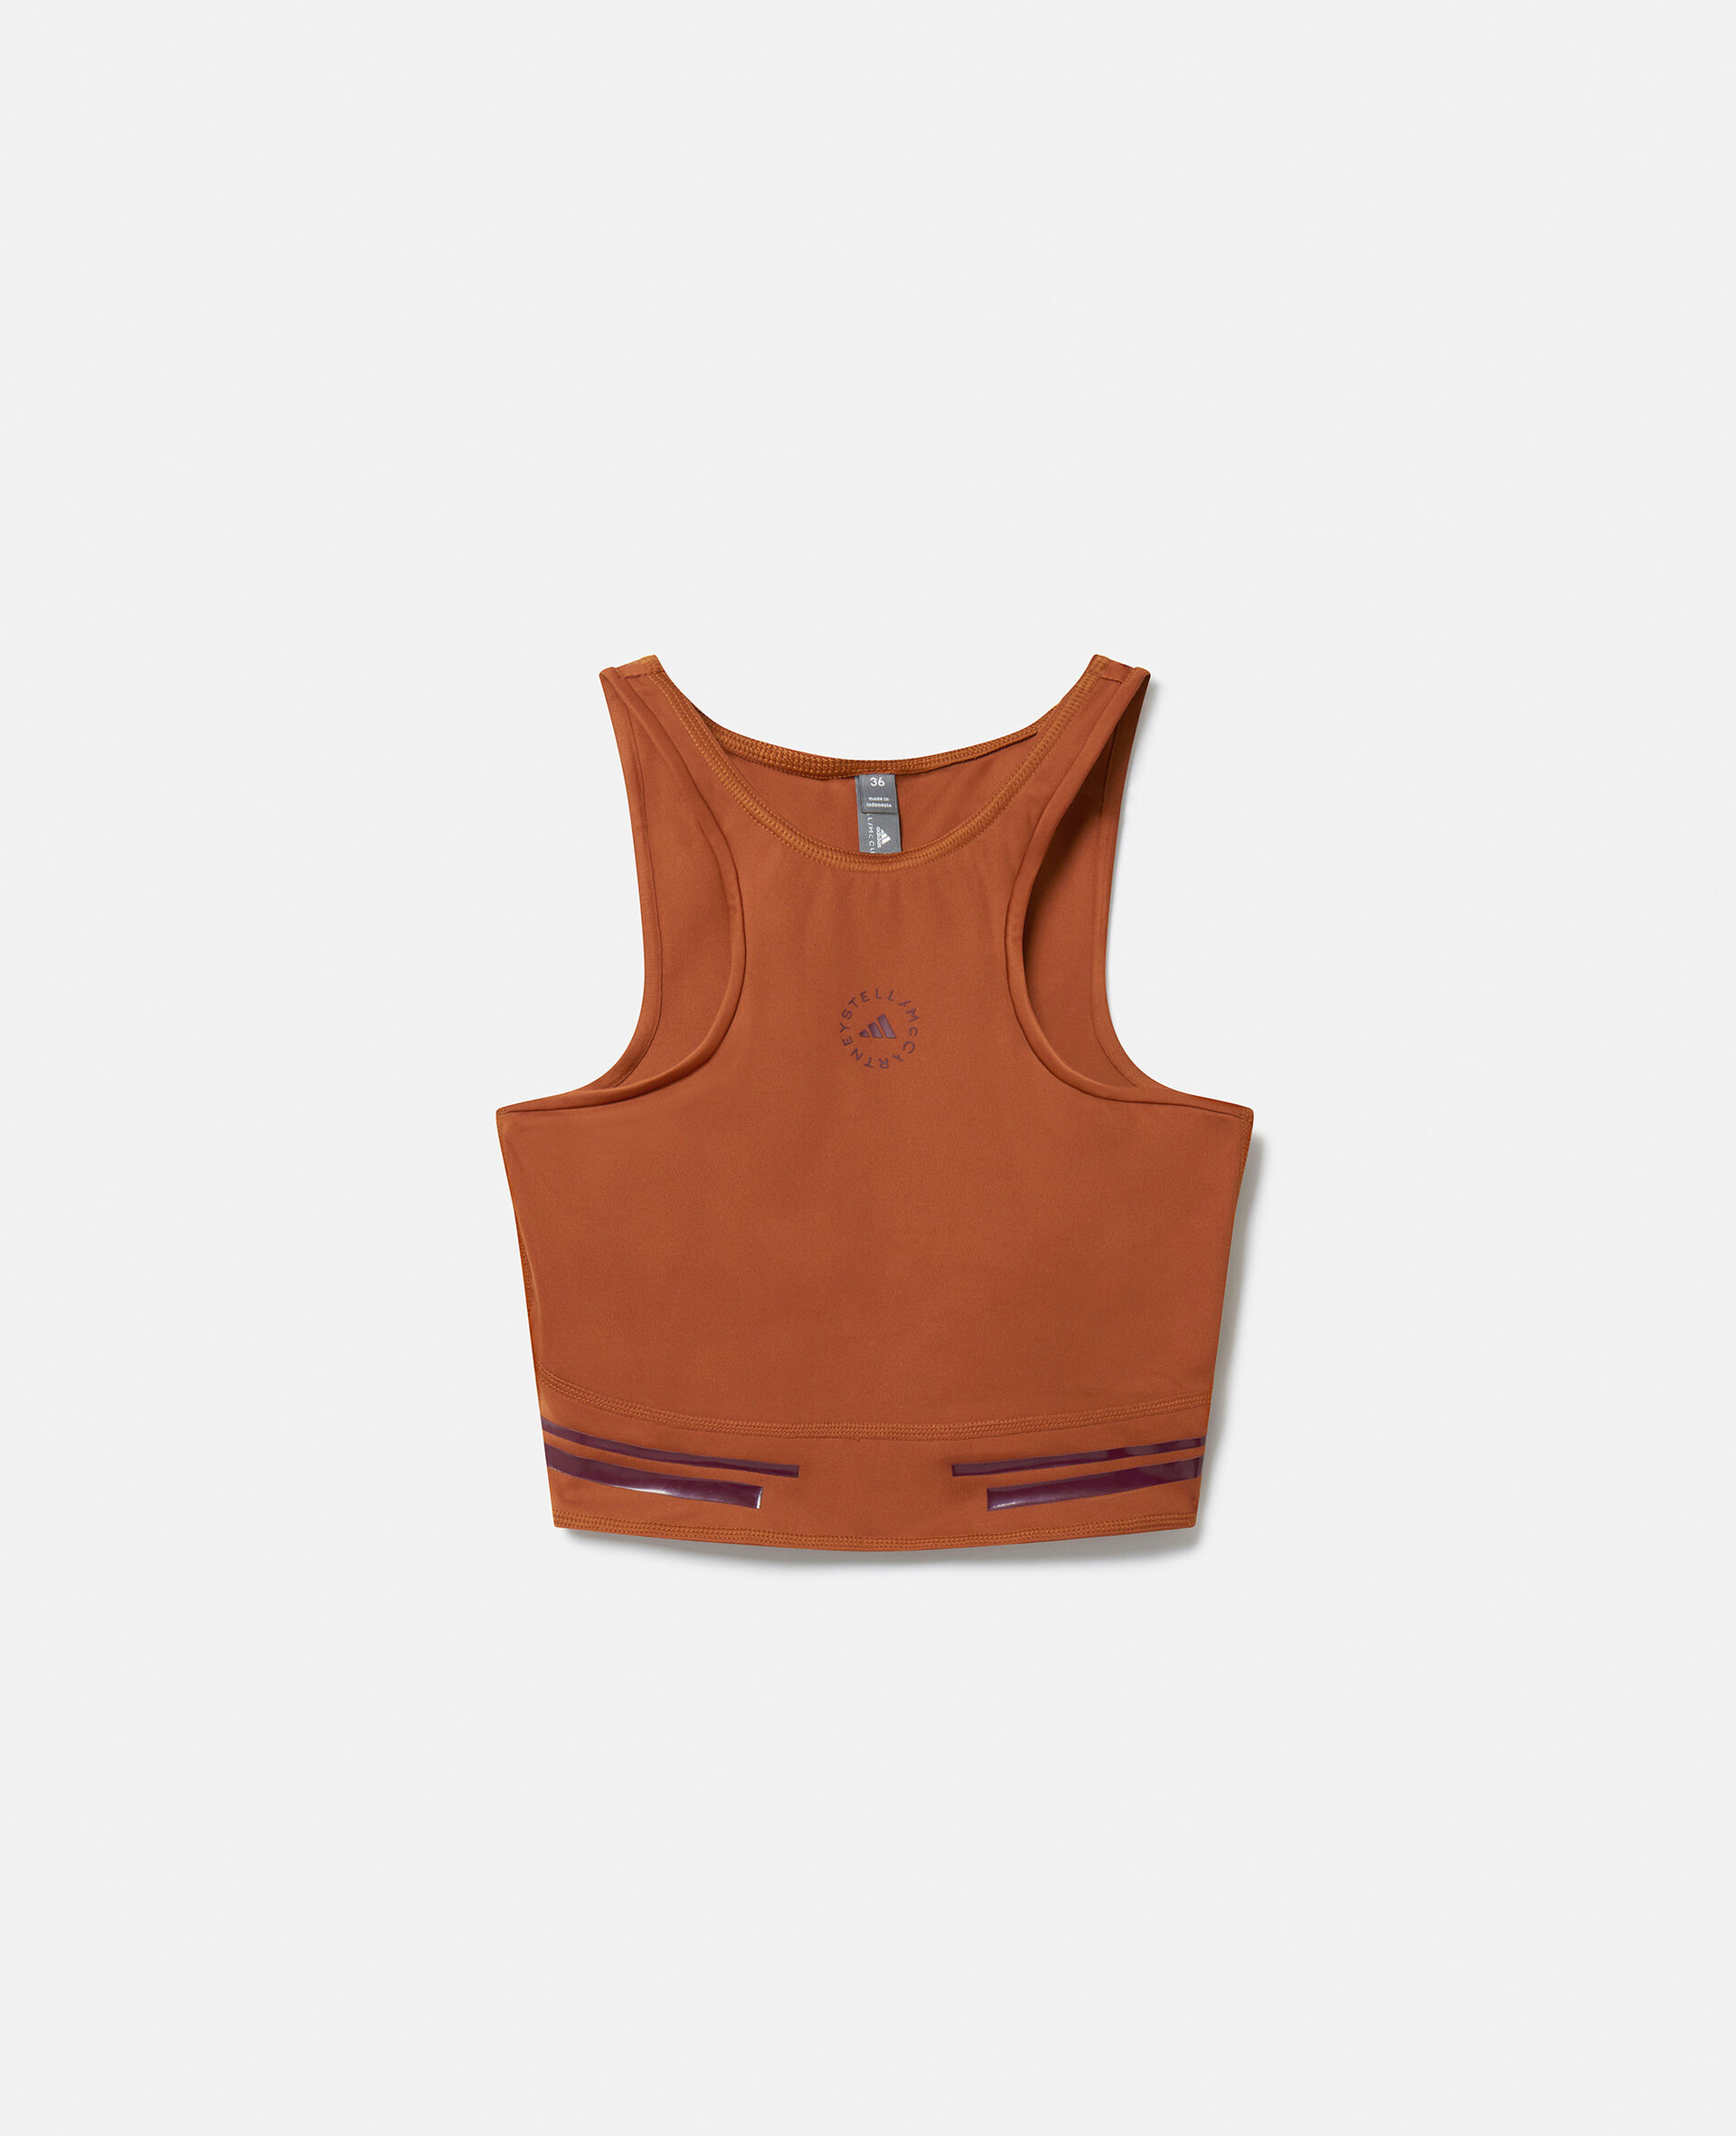 TruePace High Support Crop Top-Brown-large image number 0